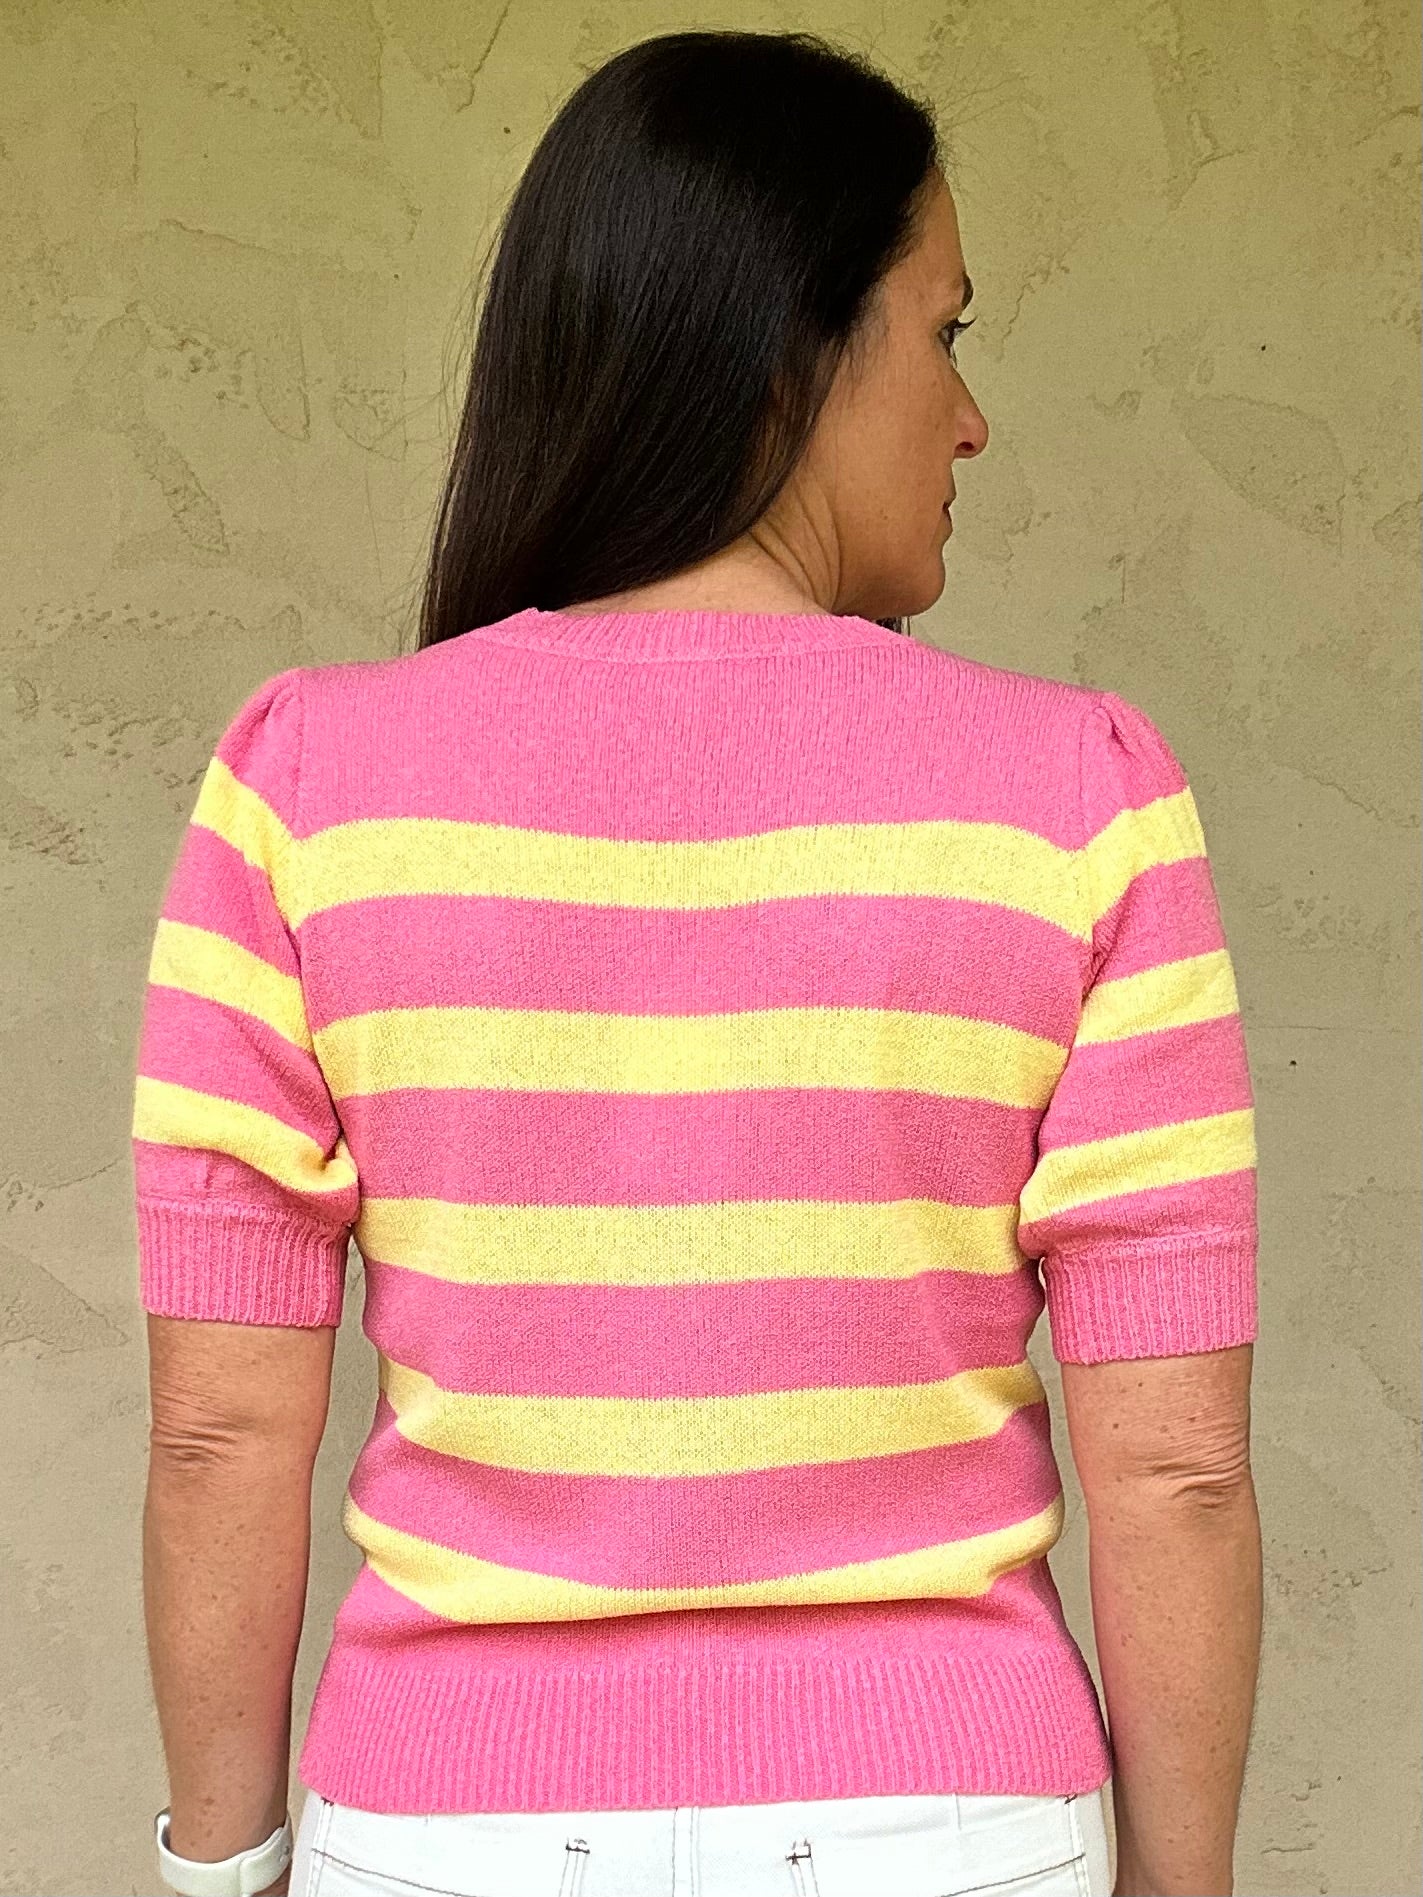 Candy Pink Striped Sweater Top